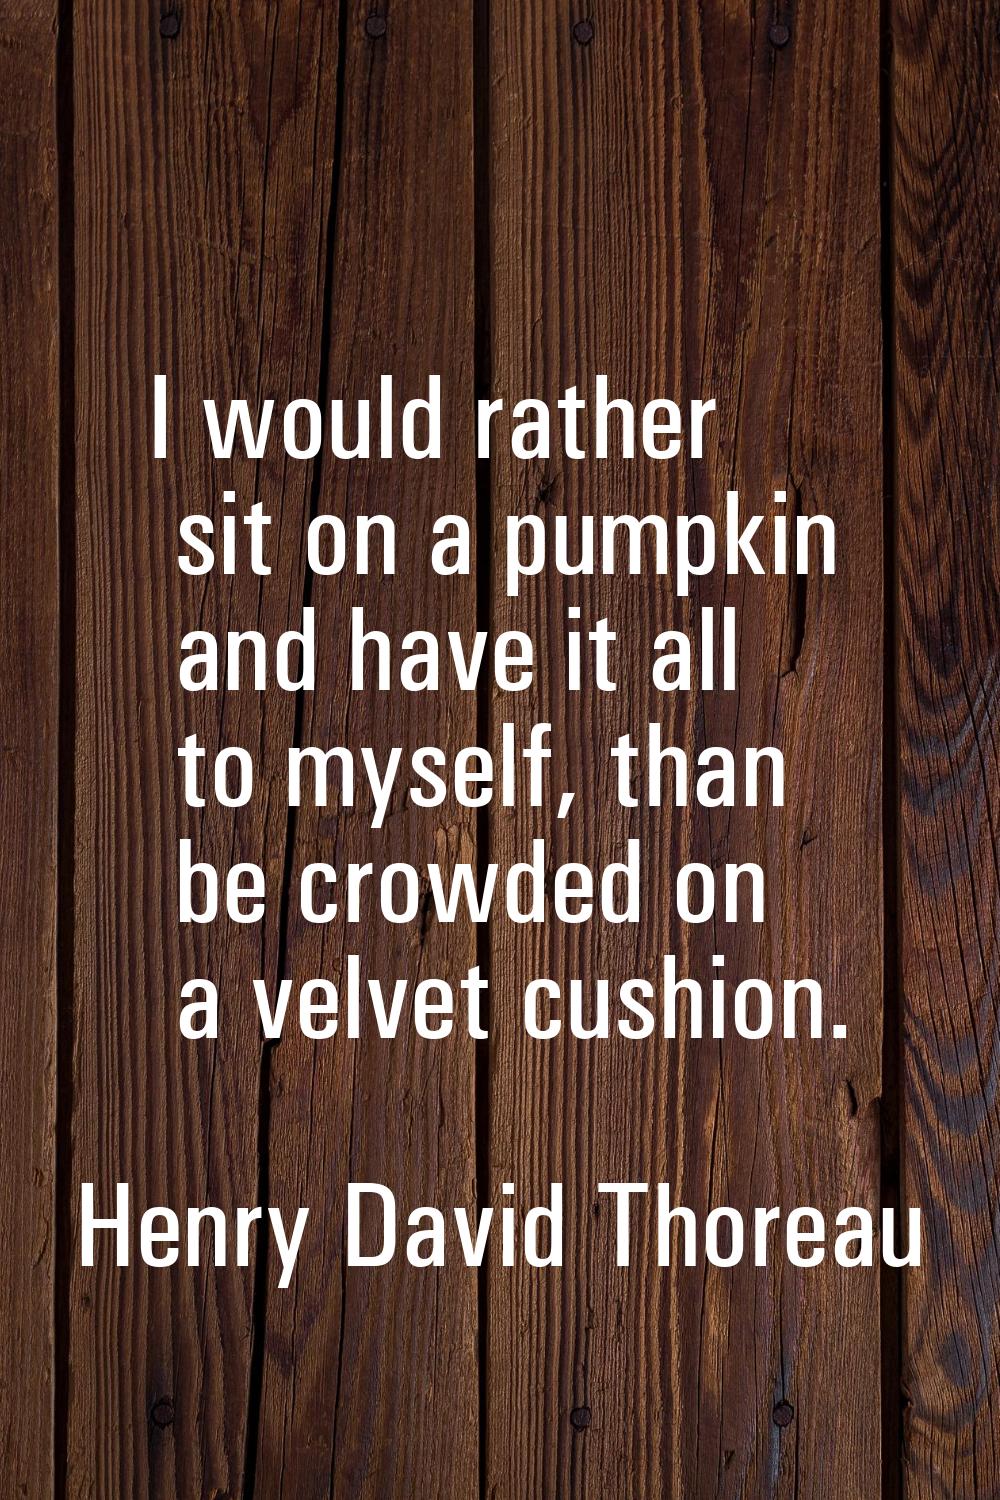 I would rather sit on a pumpkin and have it all to myself, than be crowded on a velvet cushion.